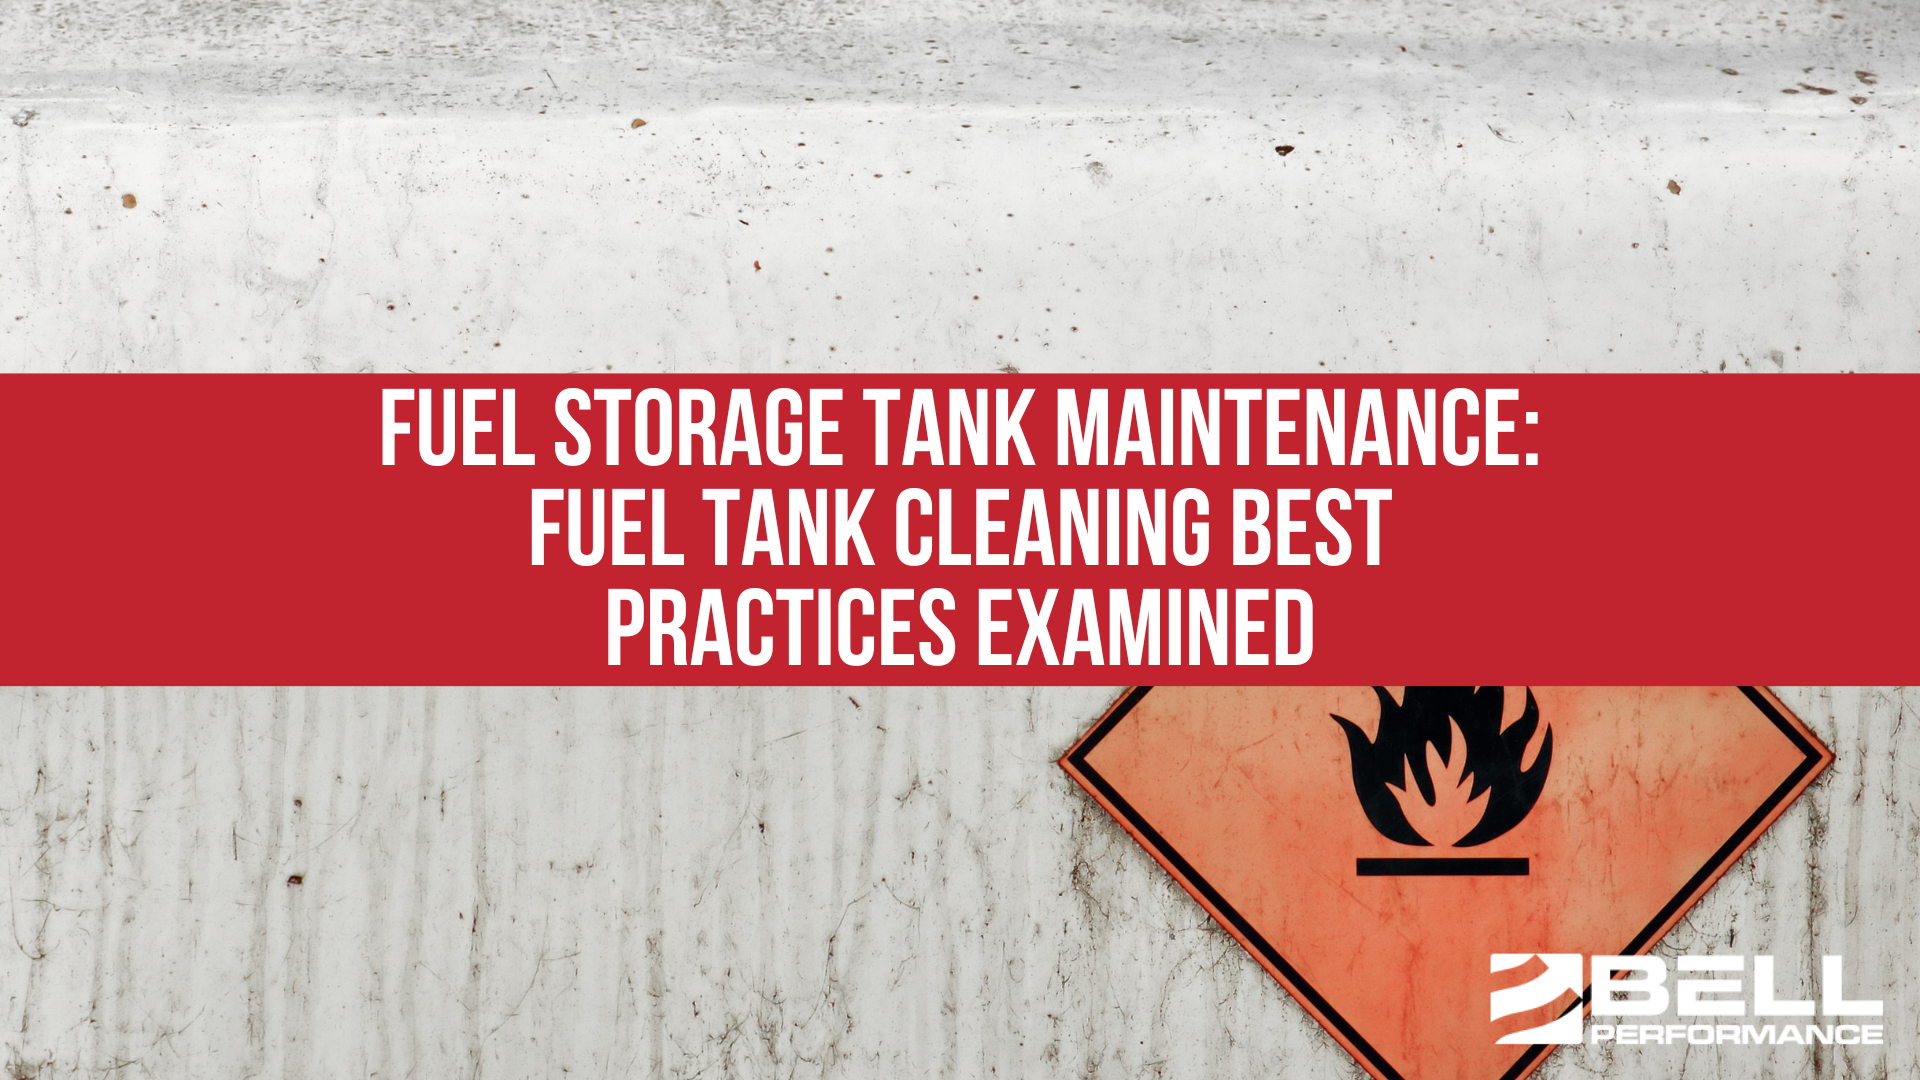 Fuel Storage Tank Maintenance: Fuel Tank Cleaning Best Practices